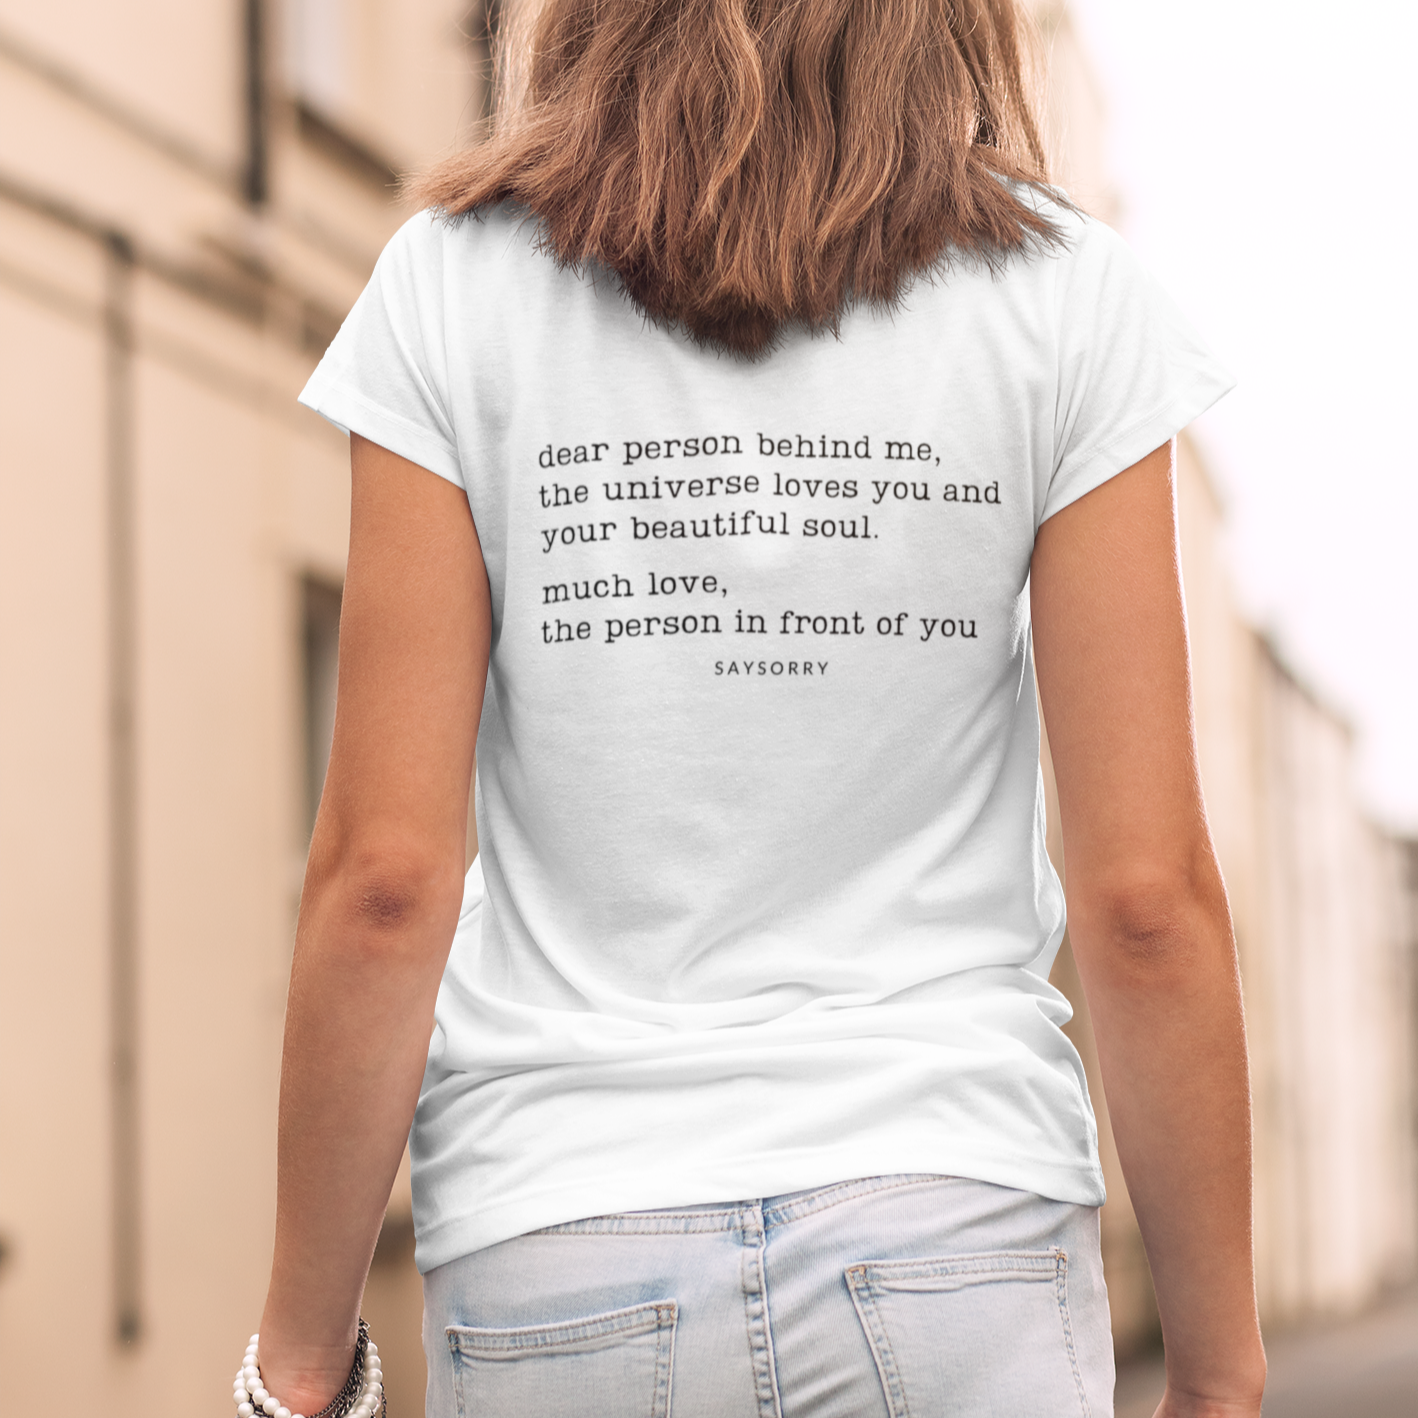 Organic Alle-Größen-Shirt »Dear person behind me, the universe loves you and your beautiful soul«